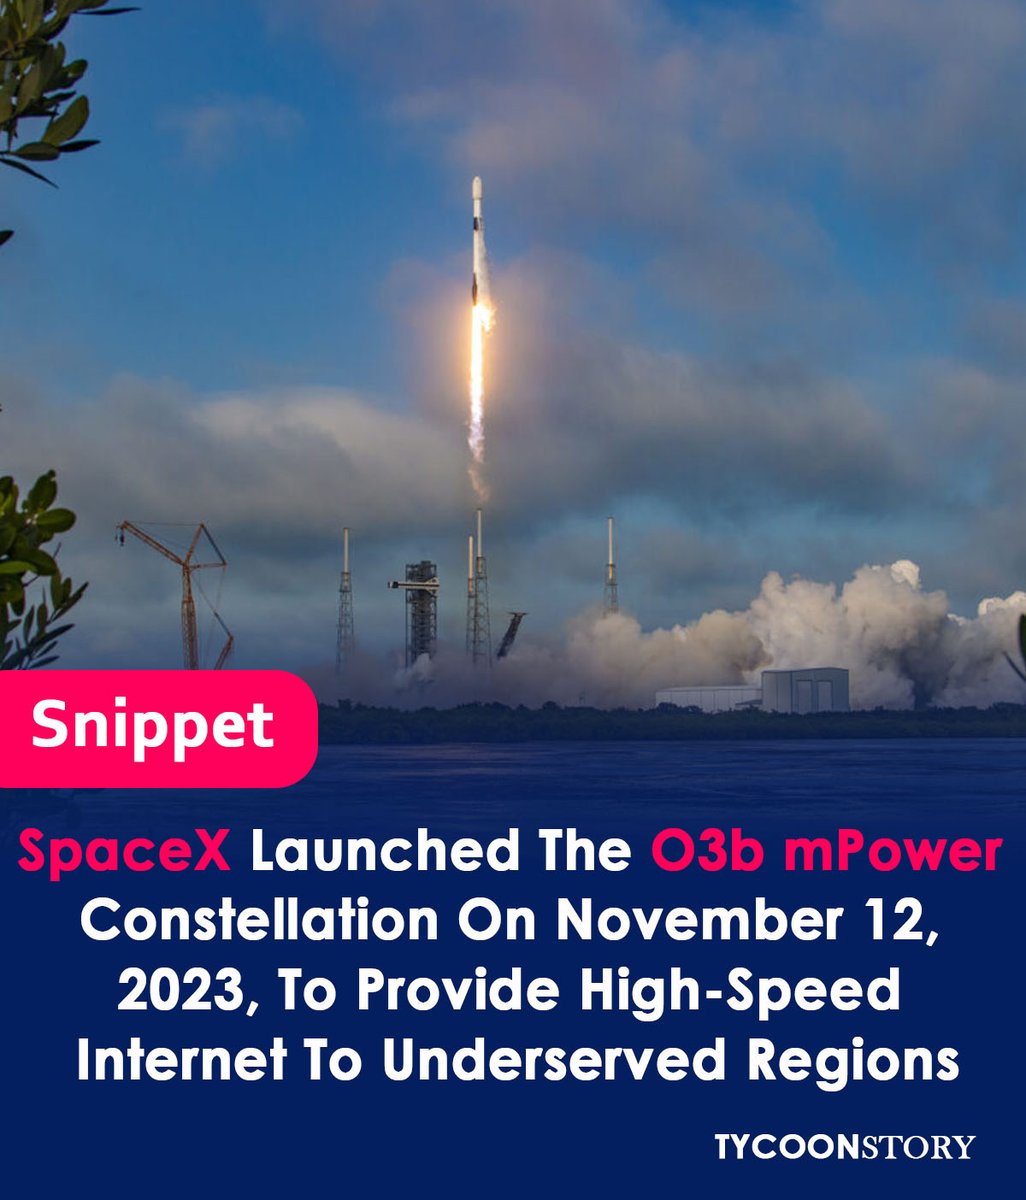 SpaceX completes O3b mPower constellation for high-speed internet
#spacex #satelliteinternet #highspeedinternet #spacetoearth #electricalissues #gigabit #commercialservices #networkserving #government #manufacturer #spacetech #telemedicine
@SES_Satellites @SpaceX